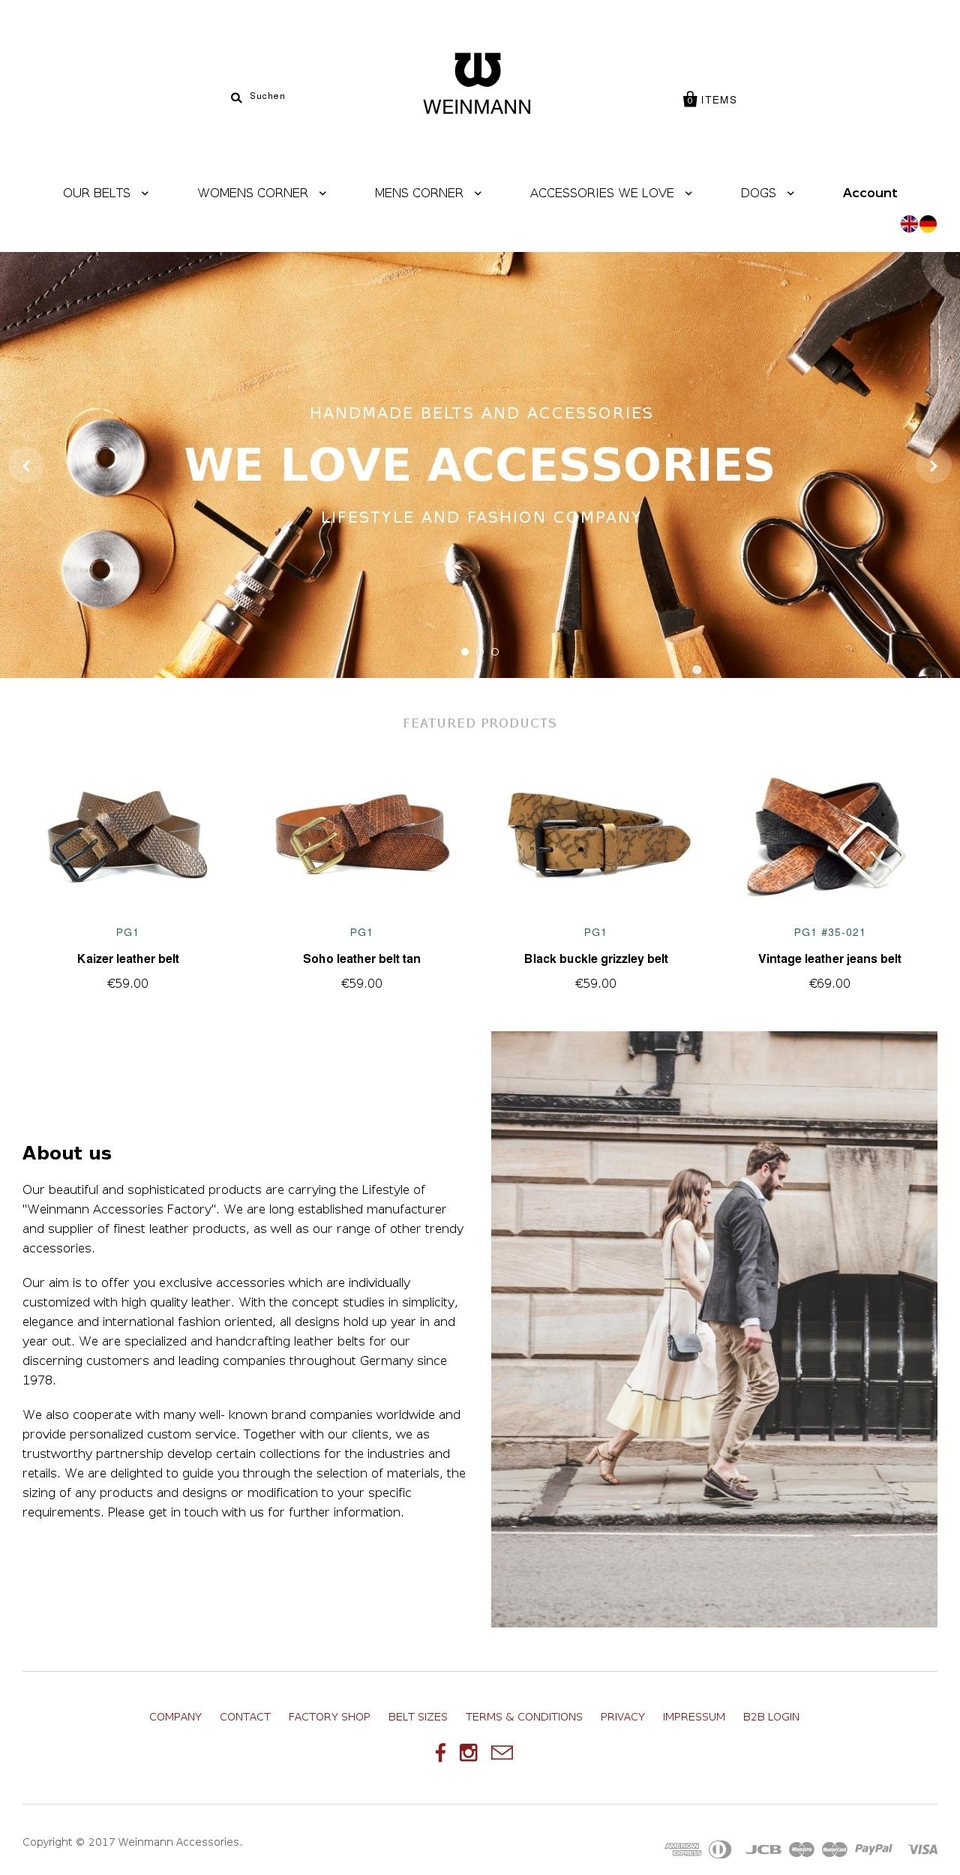 Pacific Shopify theme site example weinmann-accessories.com